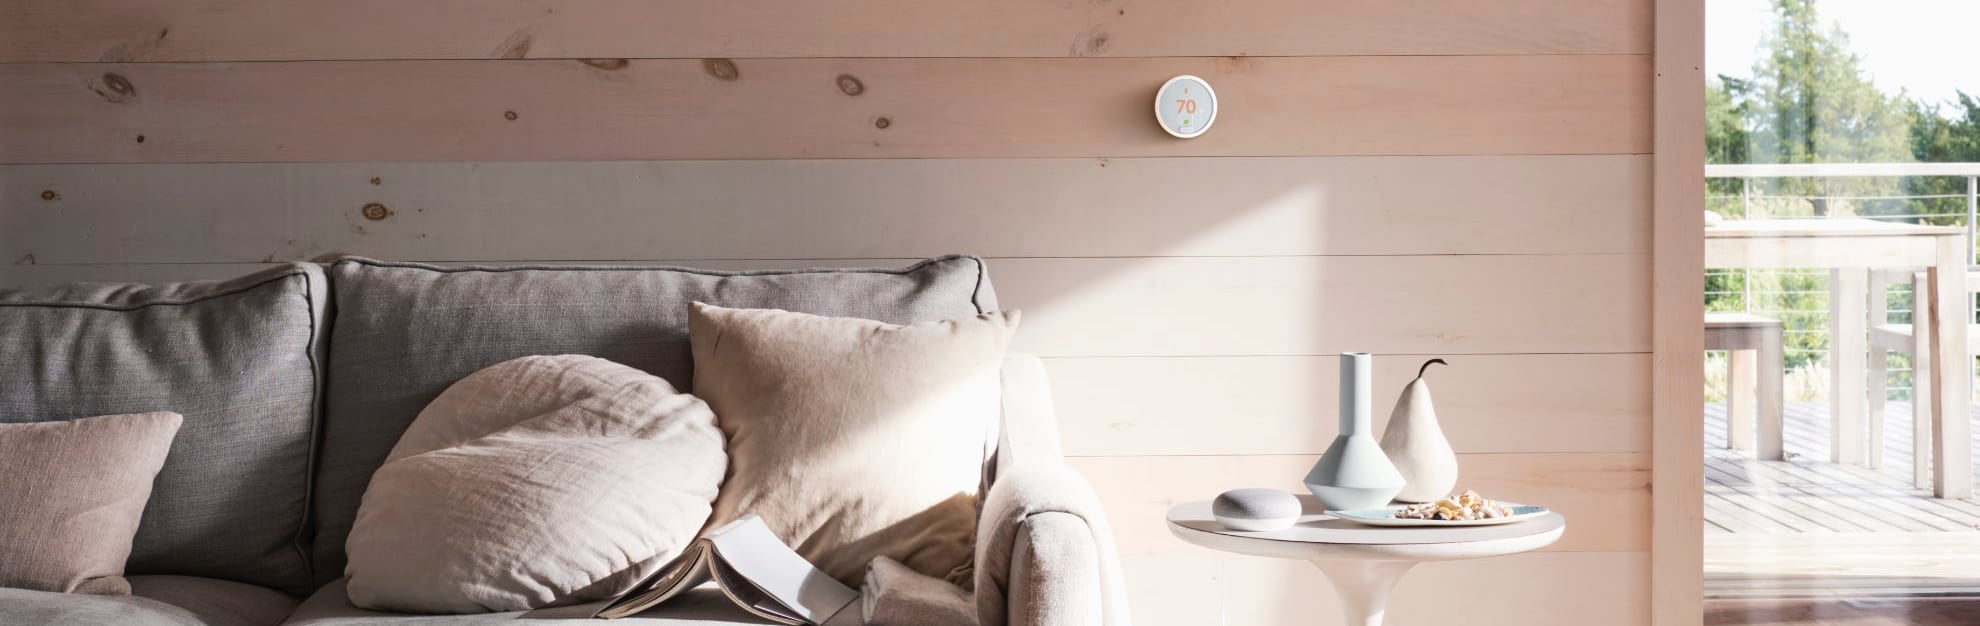 Vivint Home Automation in Sioux City